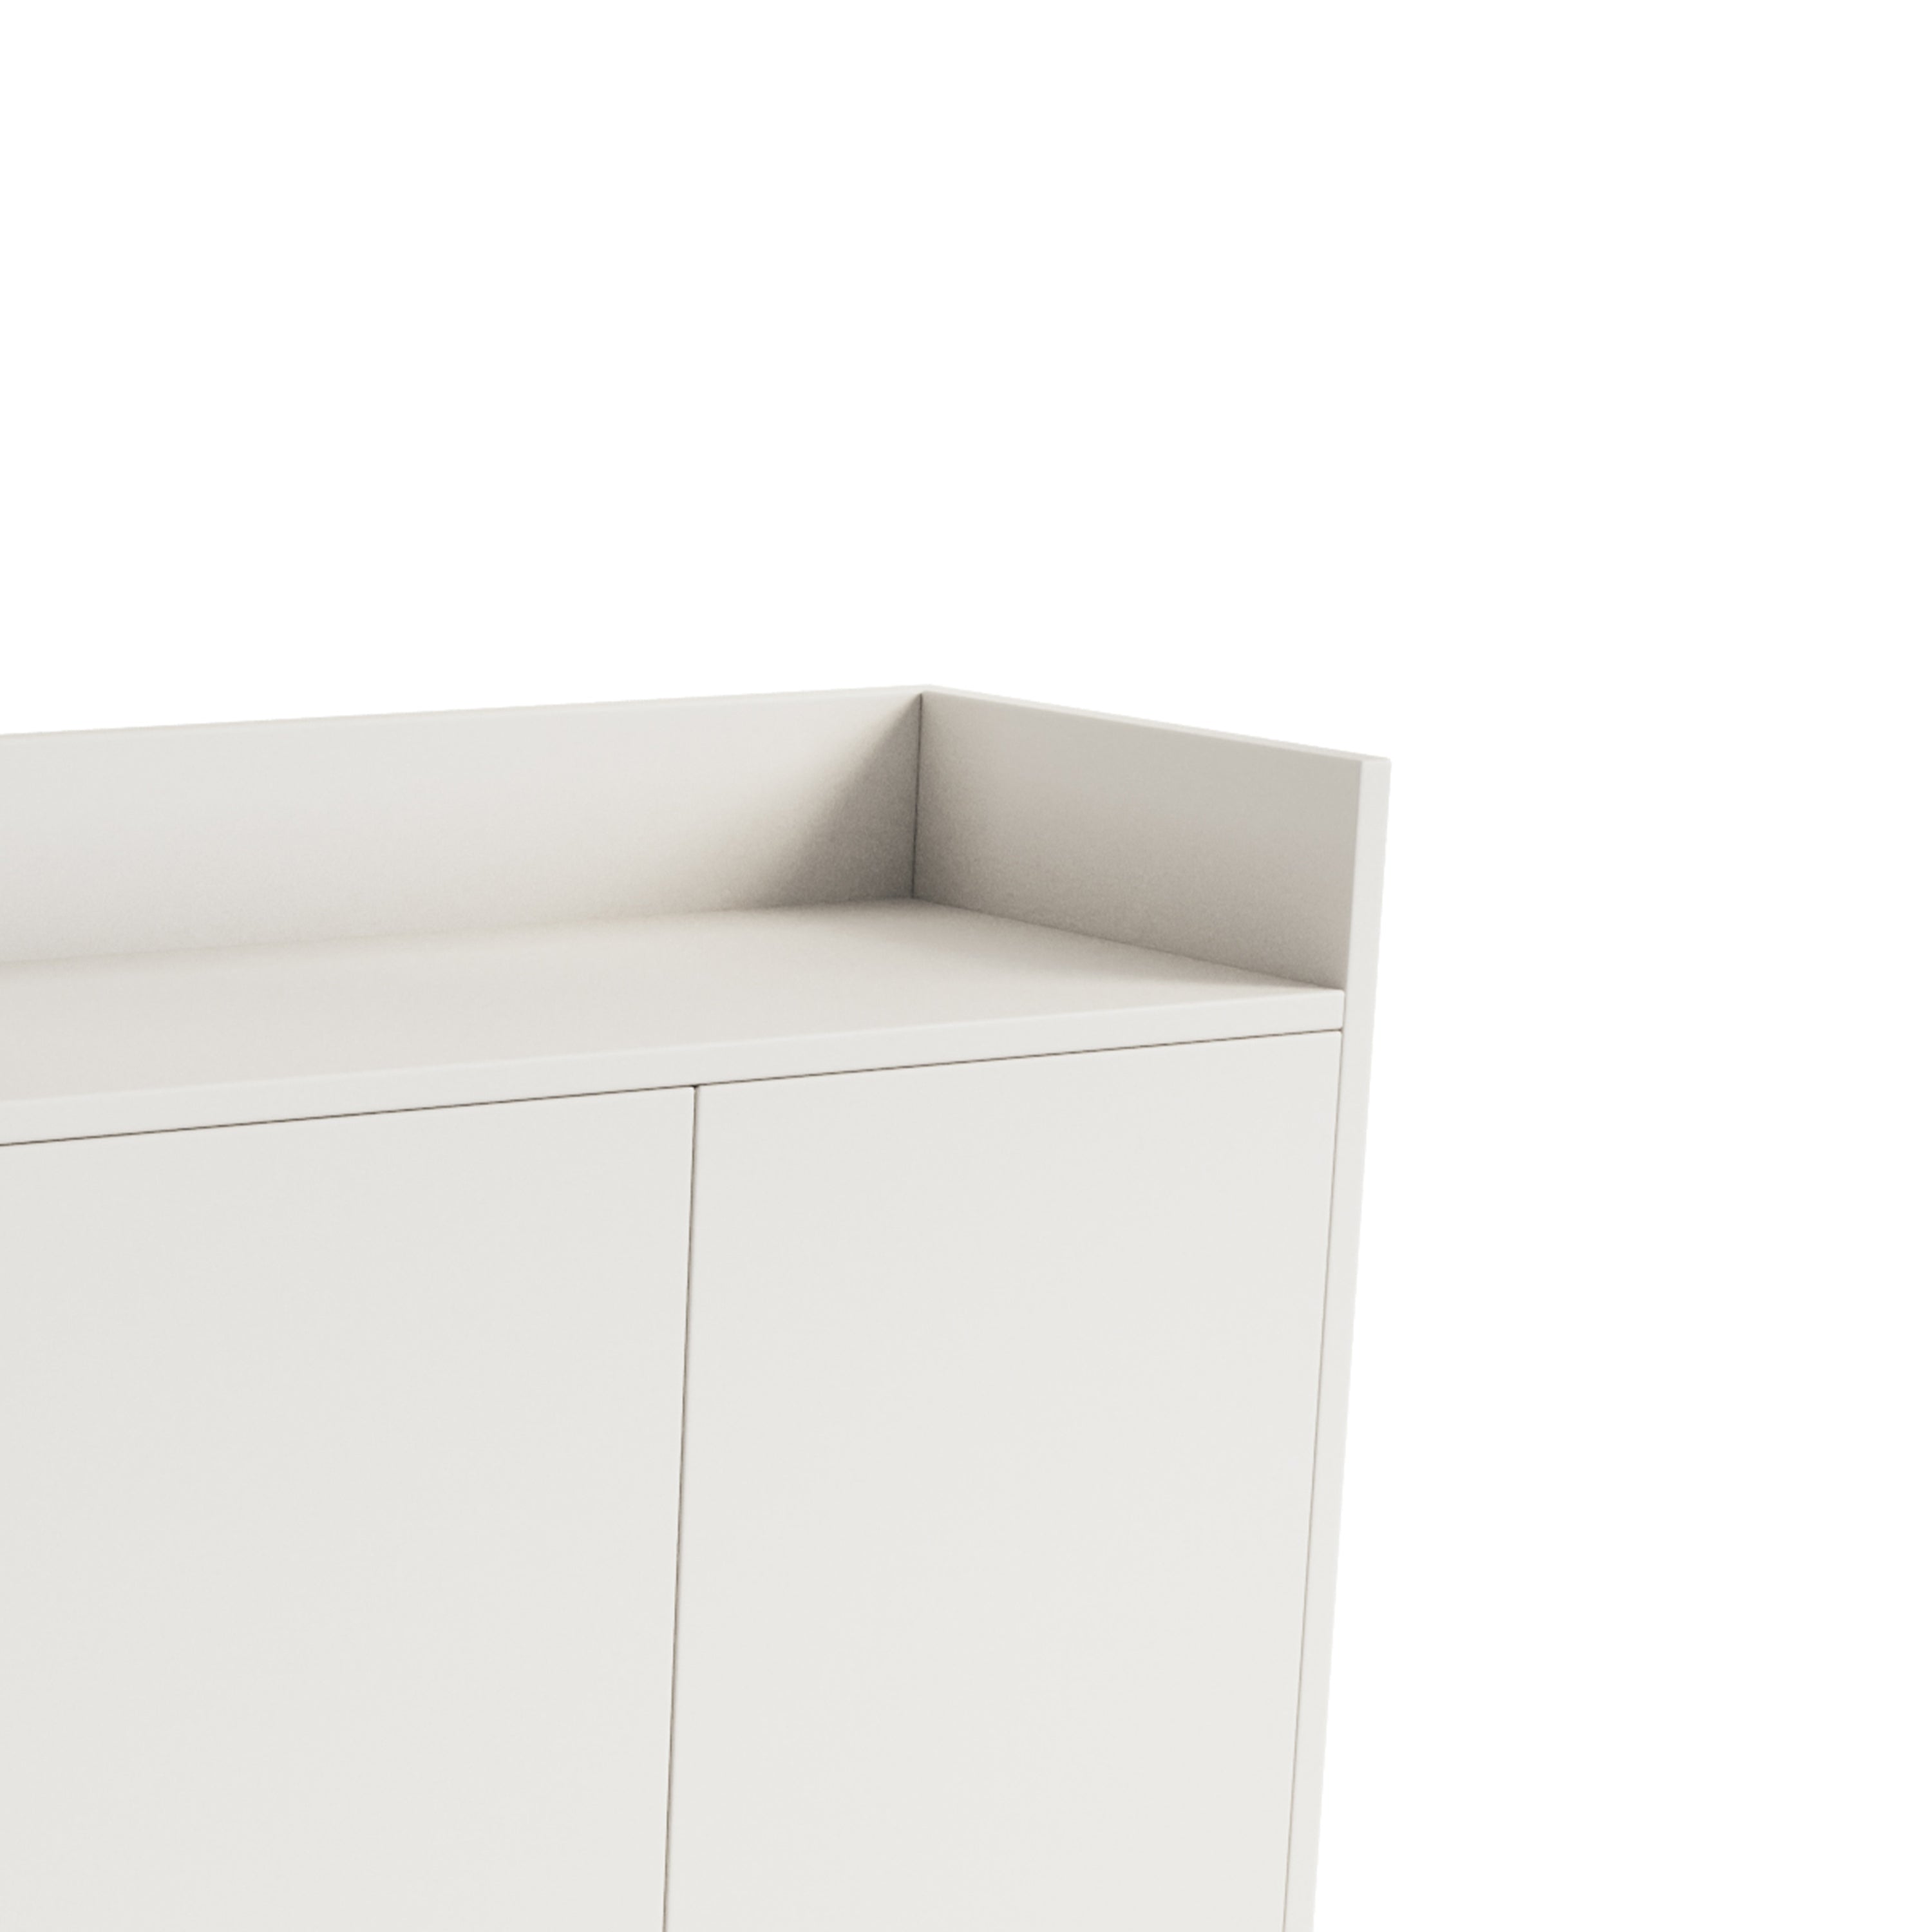 Stylish and Functional 4-Door Storage Cabinet with Square Metal Legs and Particle Board Material - White